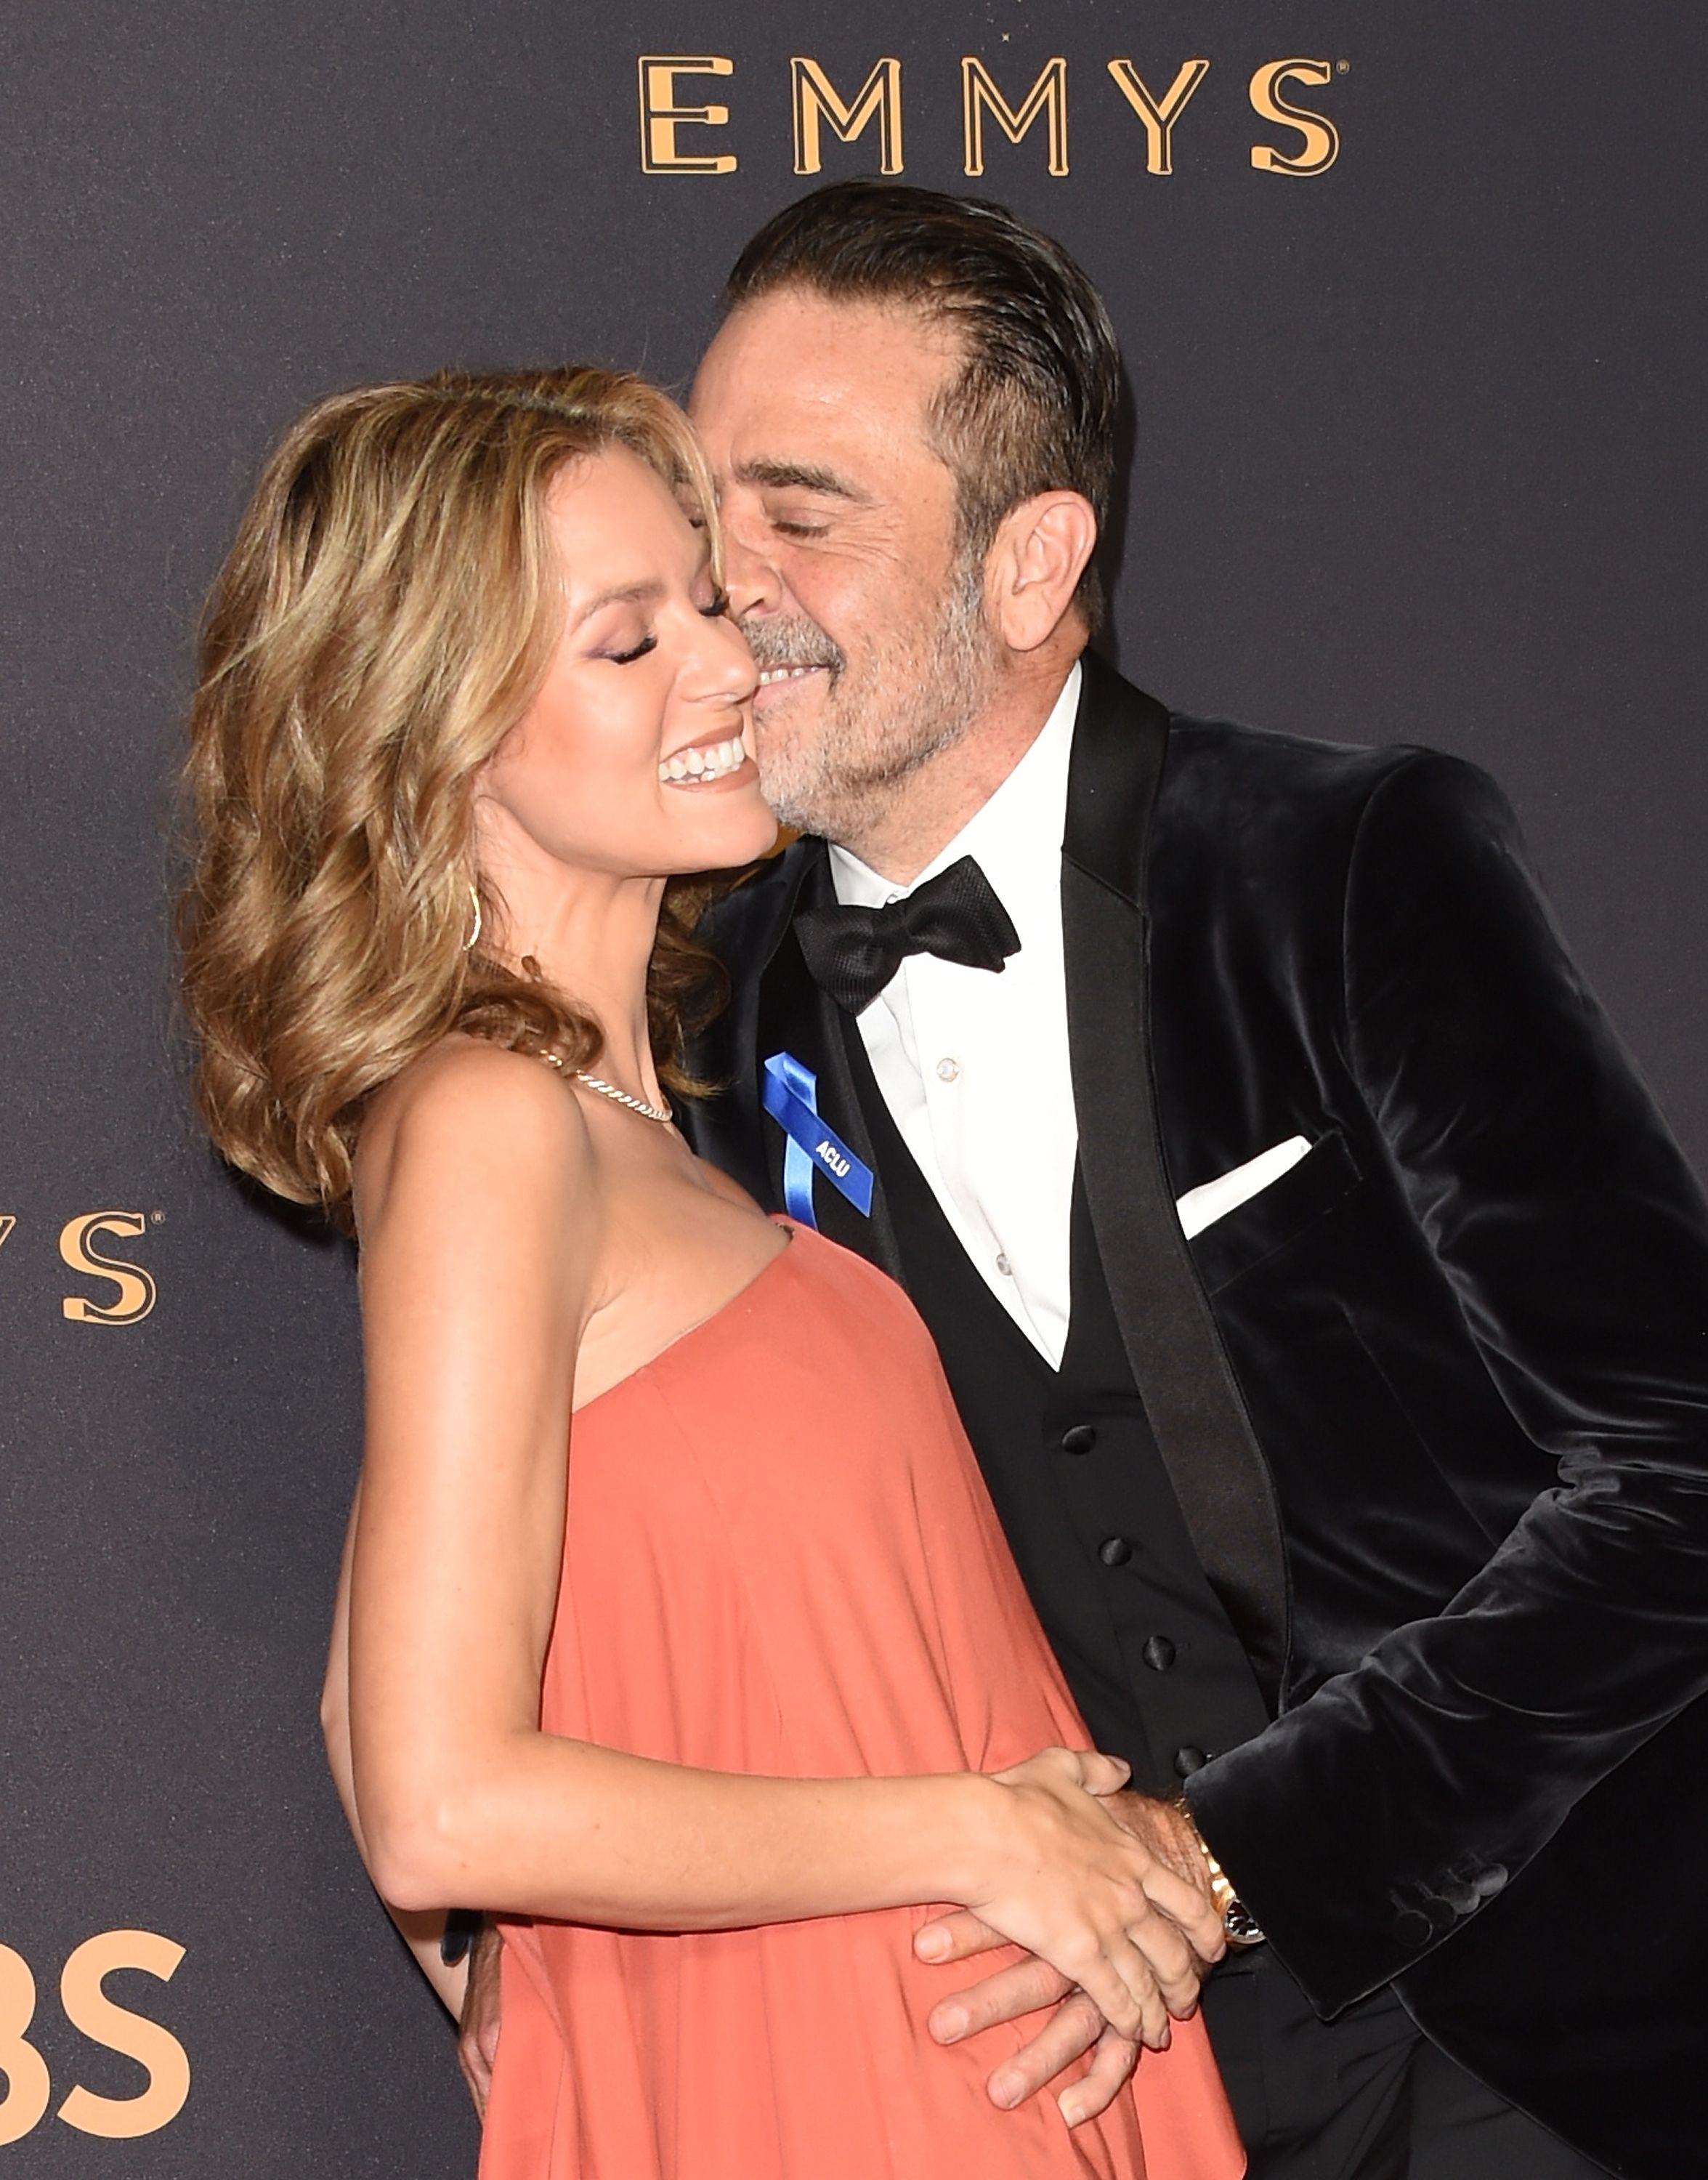 Jeffrey Dean Morgan and Hilarie Burton during the 69th Annual Primetime Emmy Awards at Microsoft Theater on September 17, 2017 in Los Angeles, California. | Source: Getty Images